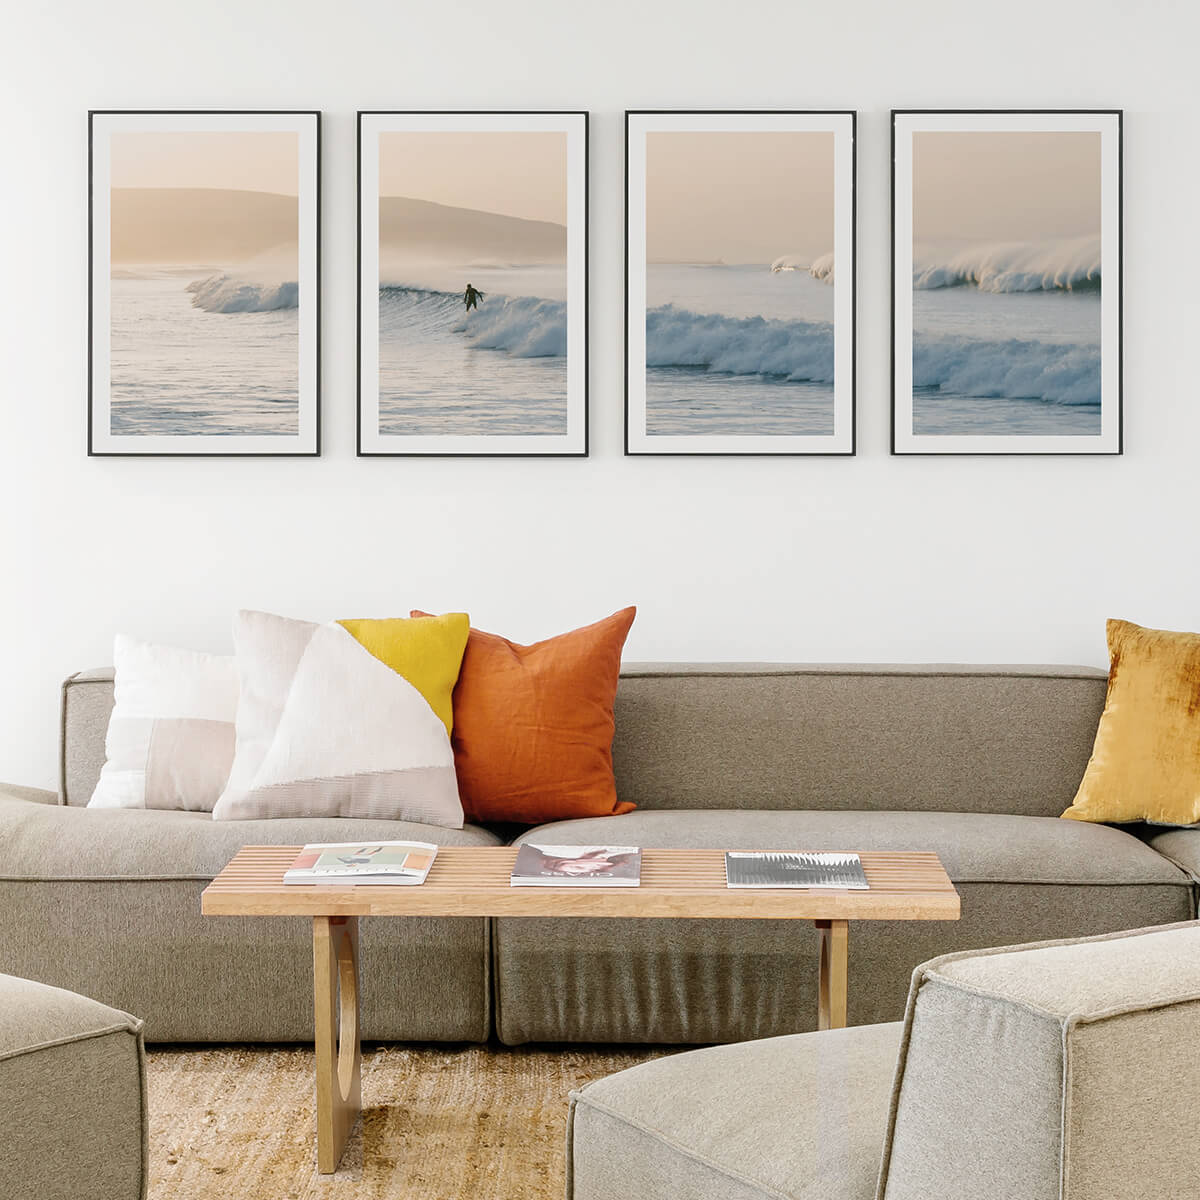 Surfing landscape photo split into four frames hanging above couch